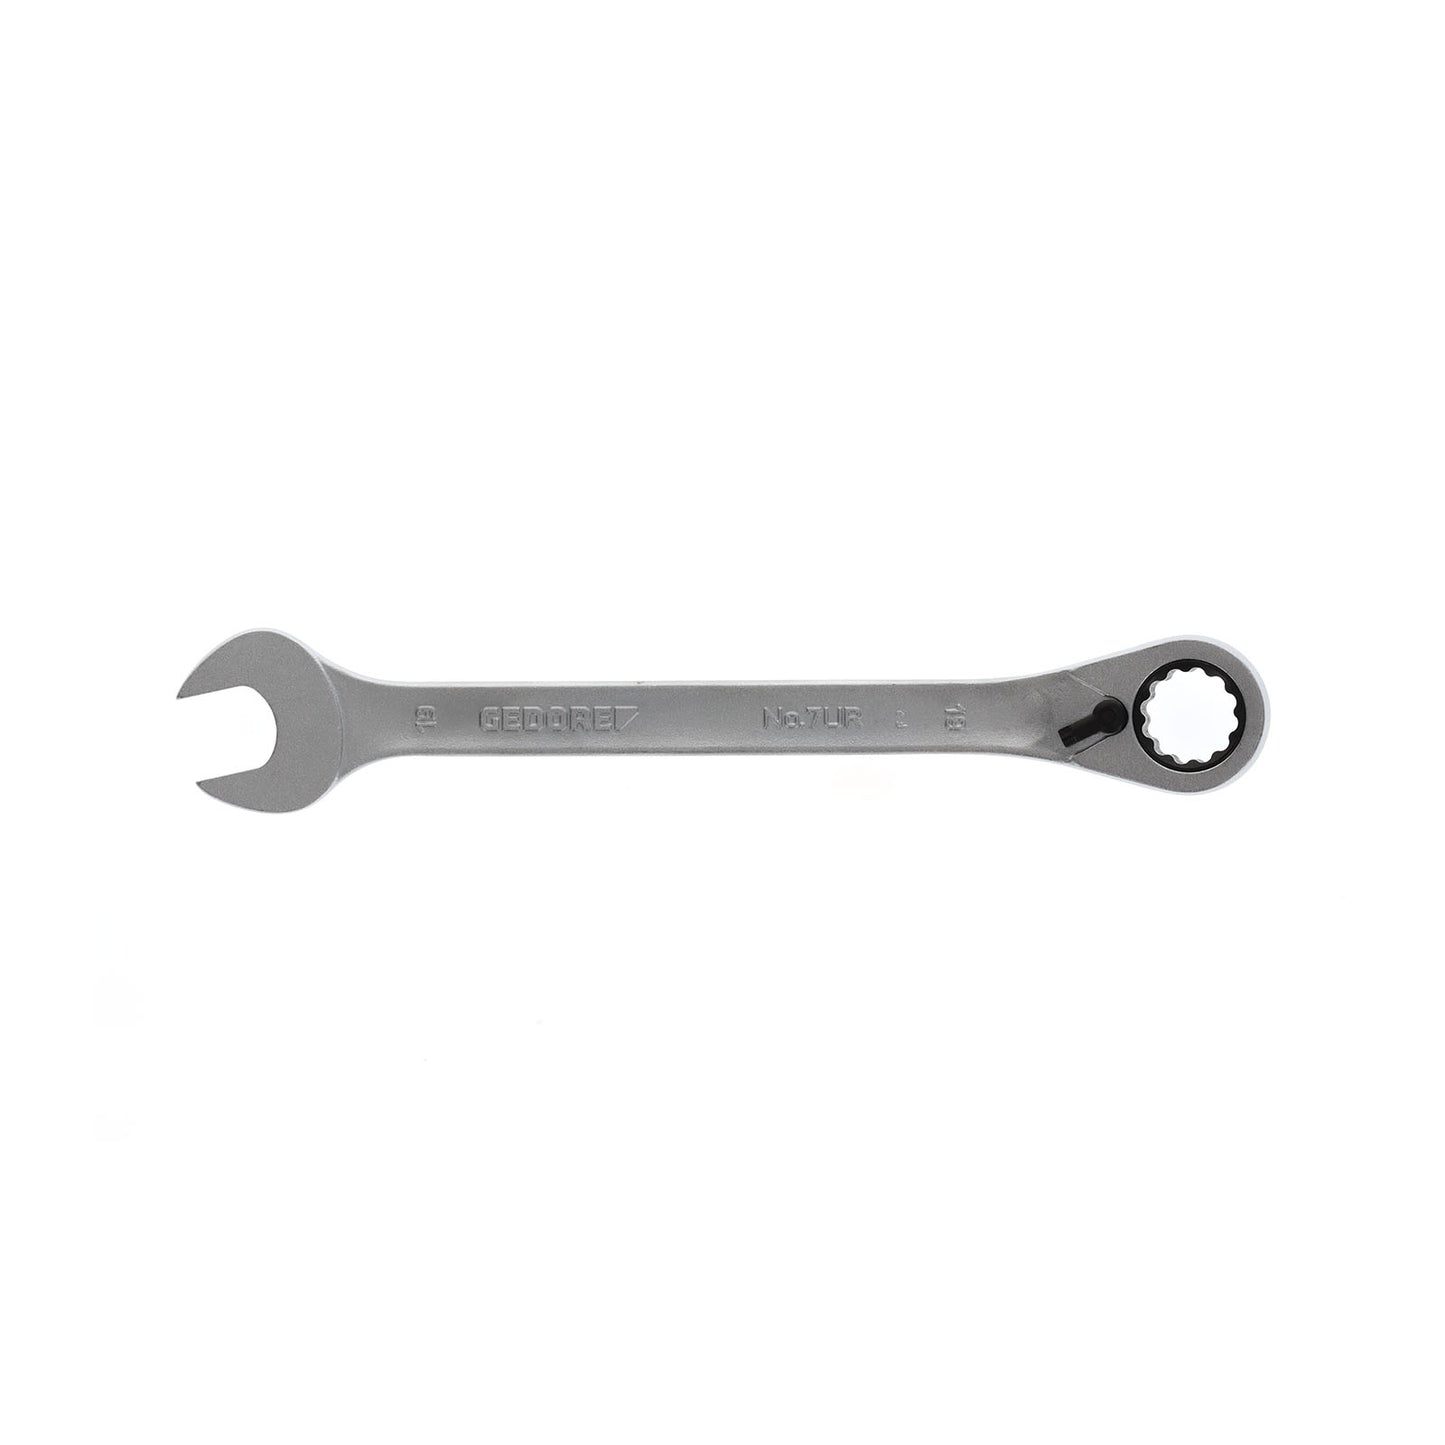 GEDORE 7 UR 19 - Ratchet combination wrench, 19mm (2297361)